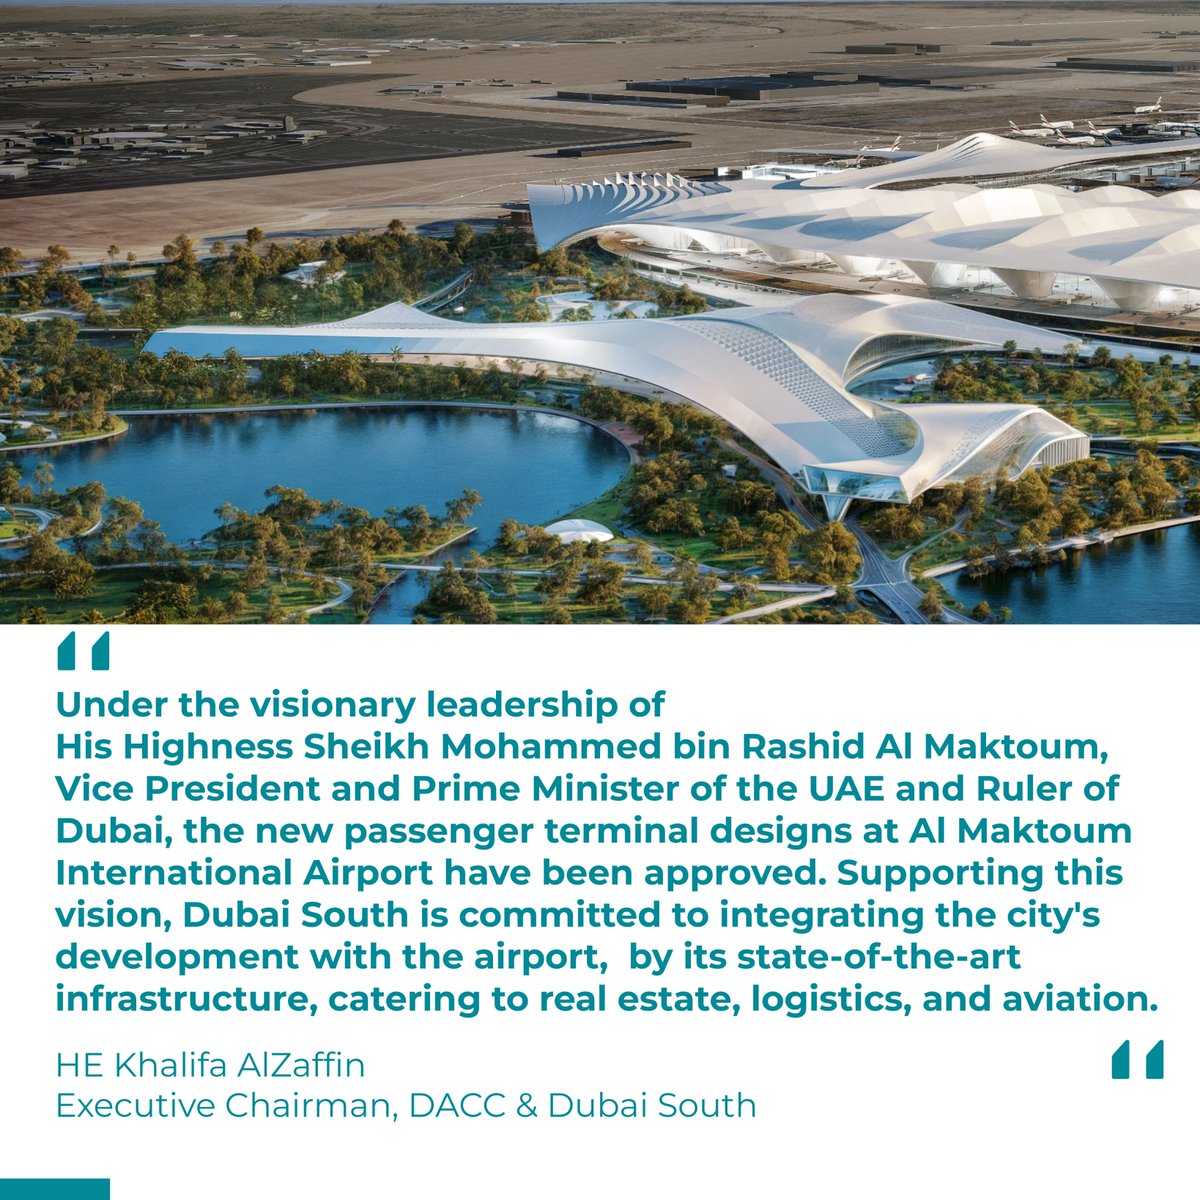 HH Sheikh Mohammed bin Rashid Al Maktoum Vice President and Prime Minister of the UAE and Ruler of Dubai approves the designs for the new passenger terminal at Al Maktoum International Airport, and commencing construction of the building at a cost of AED 128 billion.